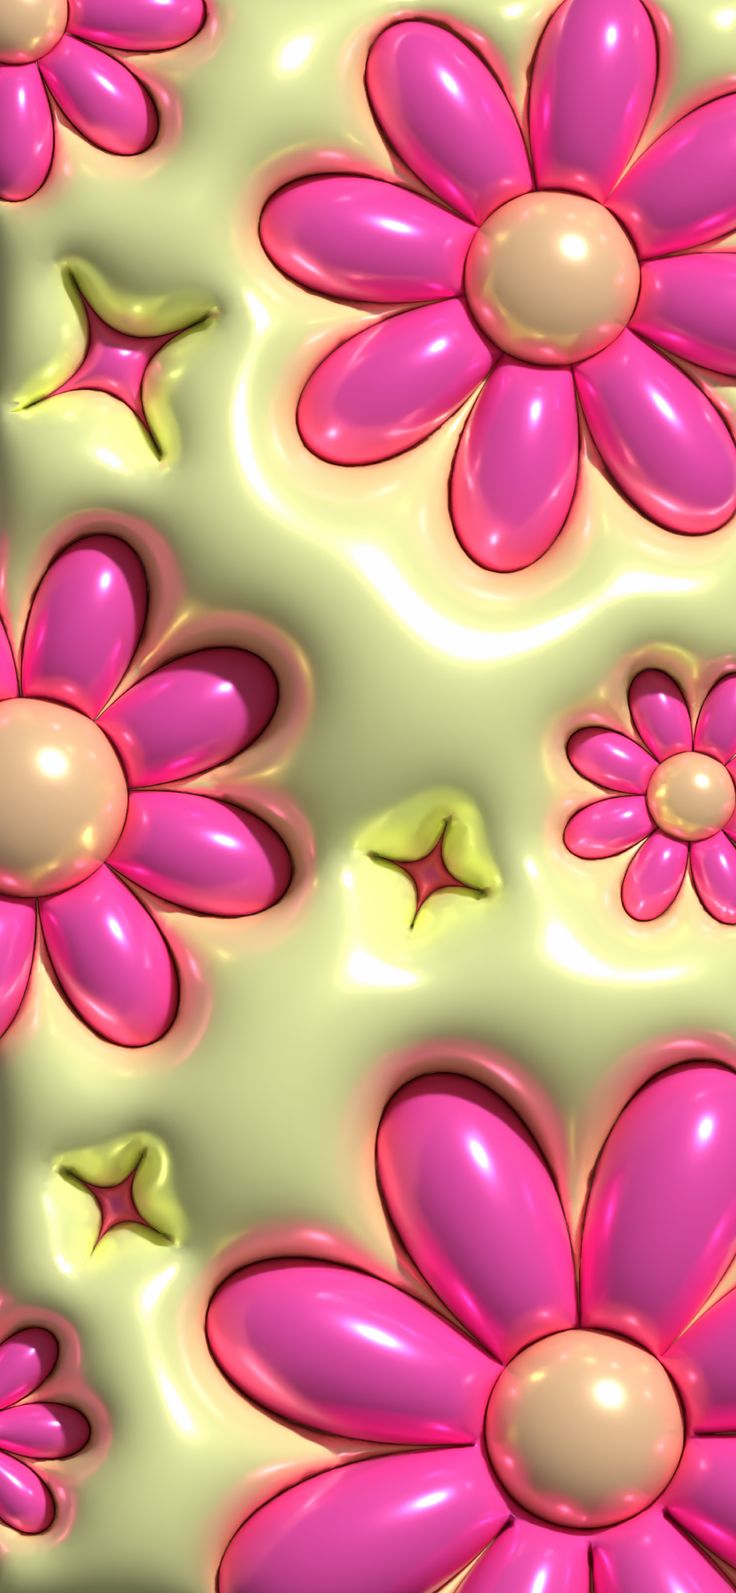 pink flowers floating on top of each other